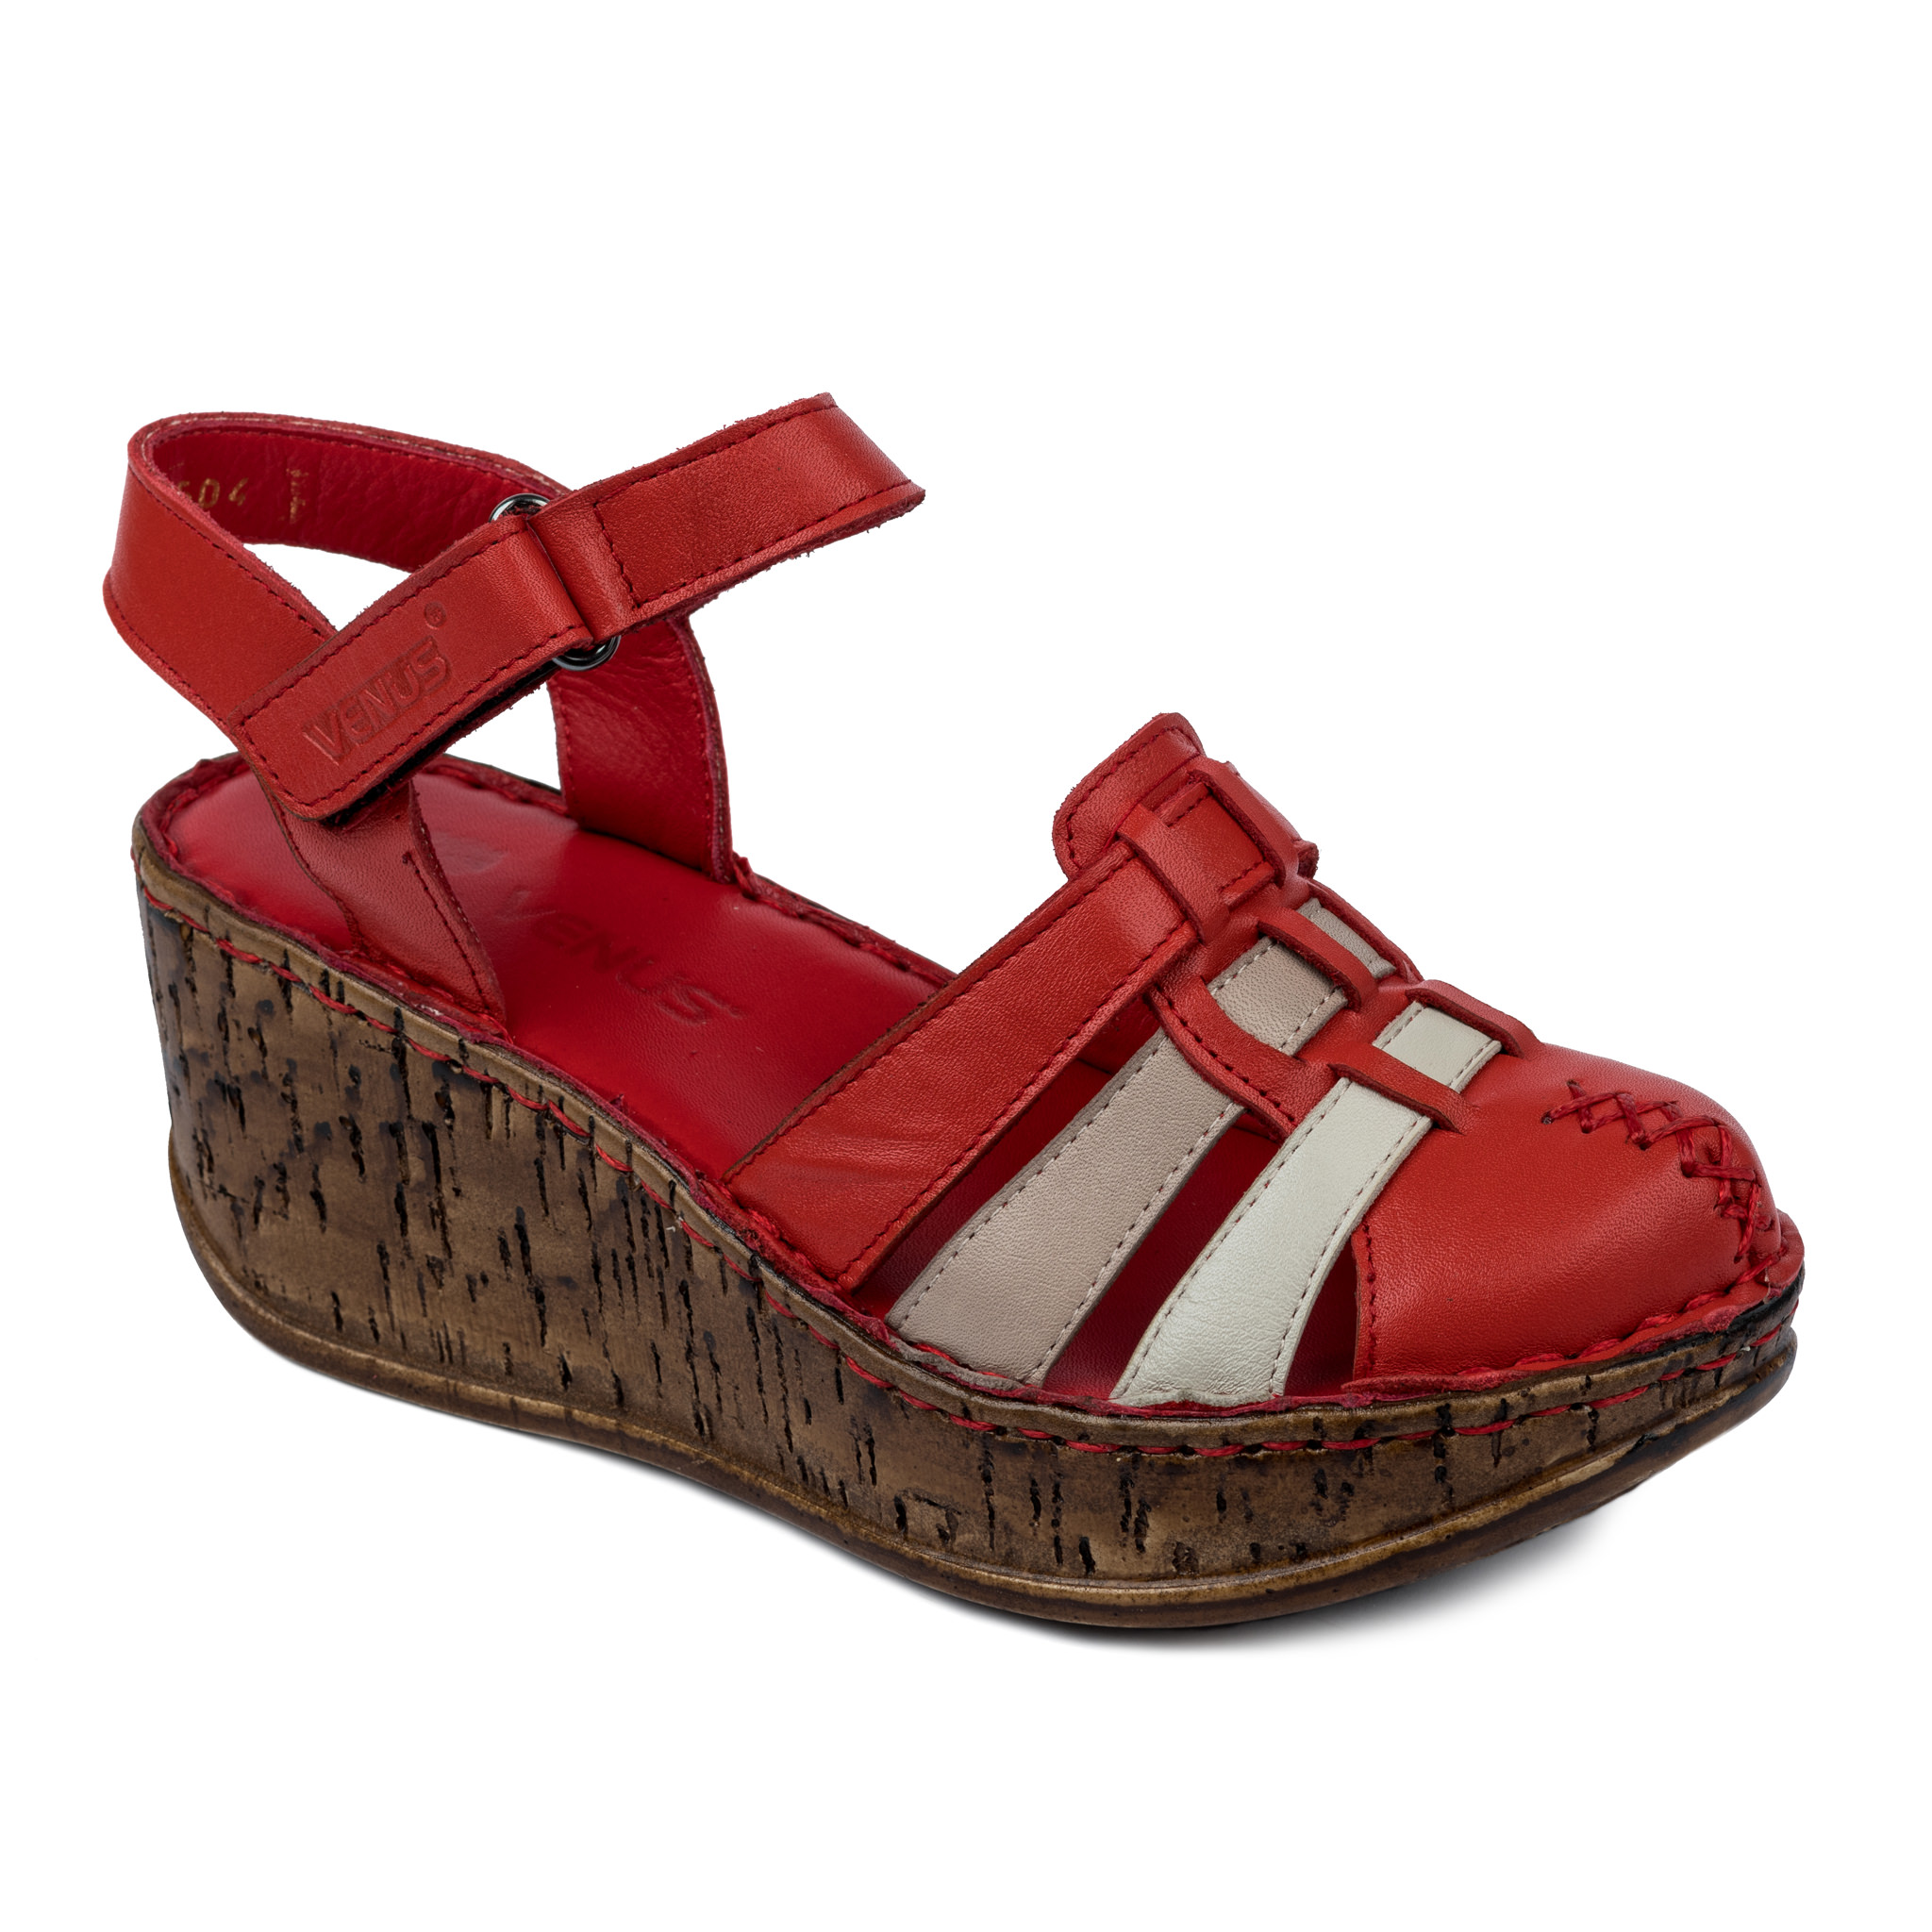 Leather sandals A191 - RED